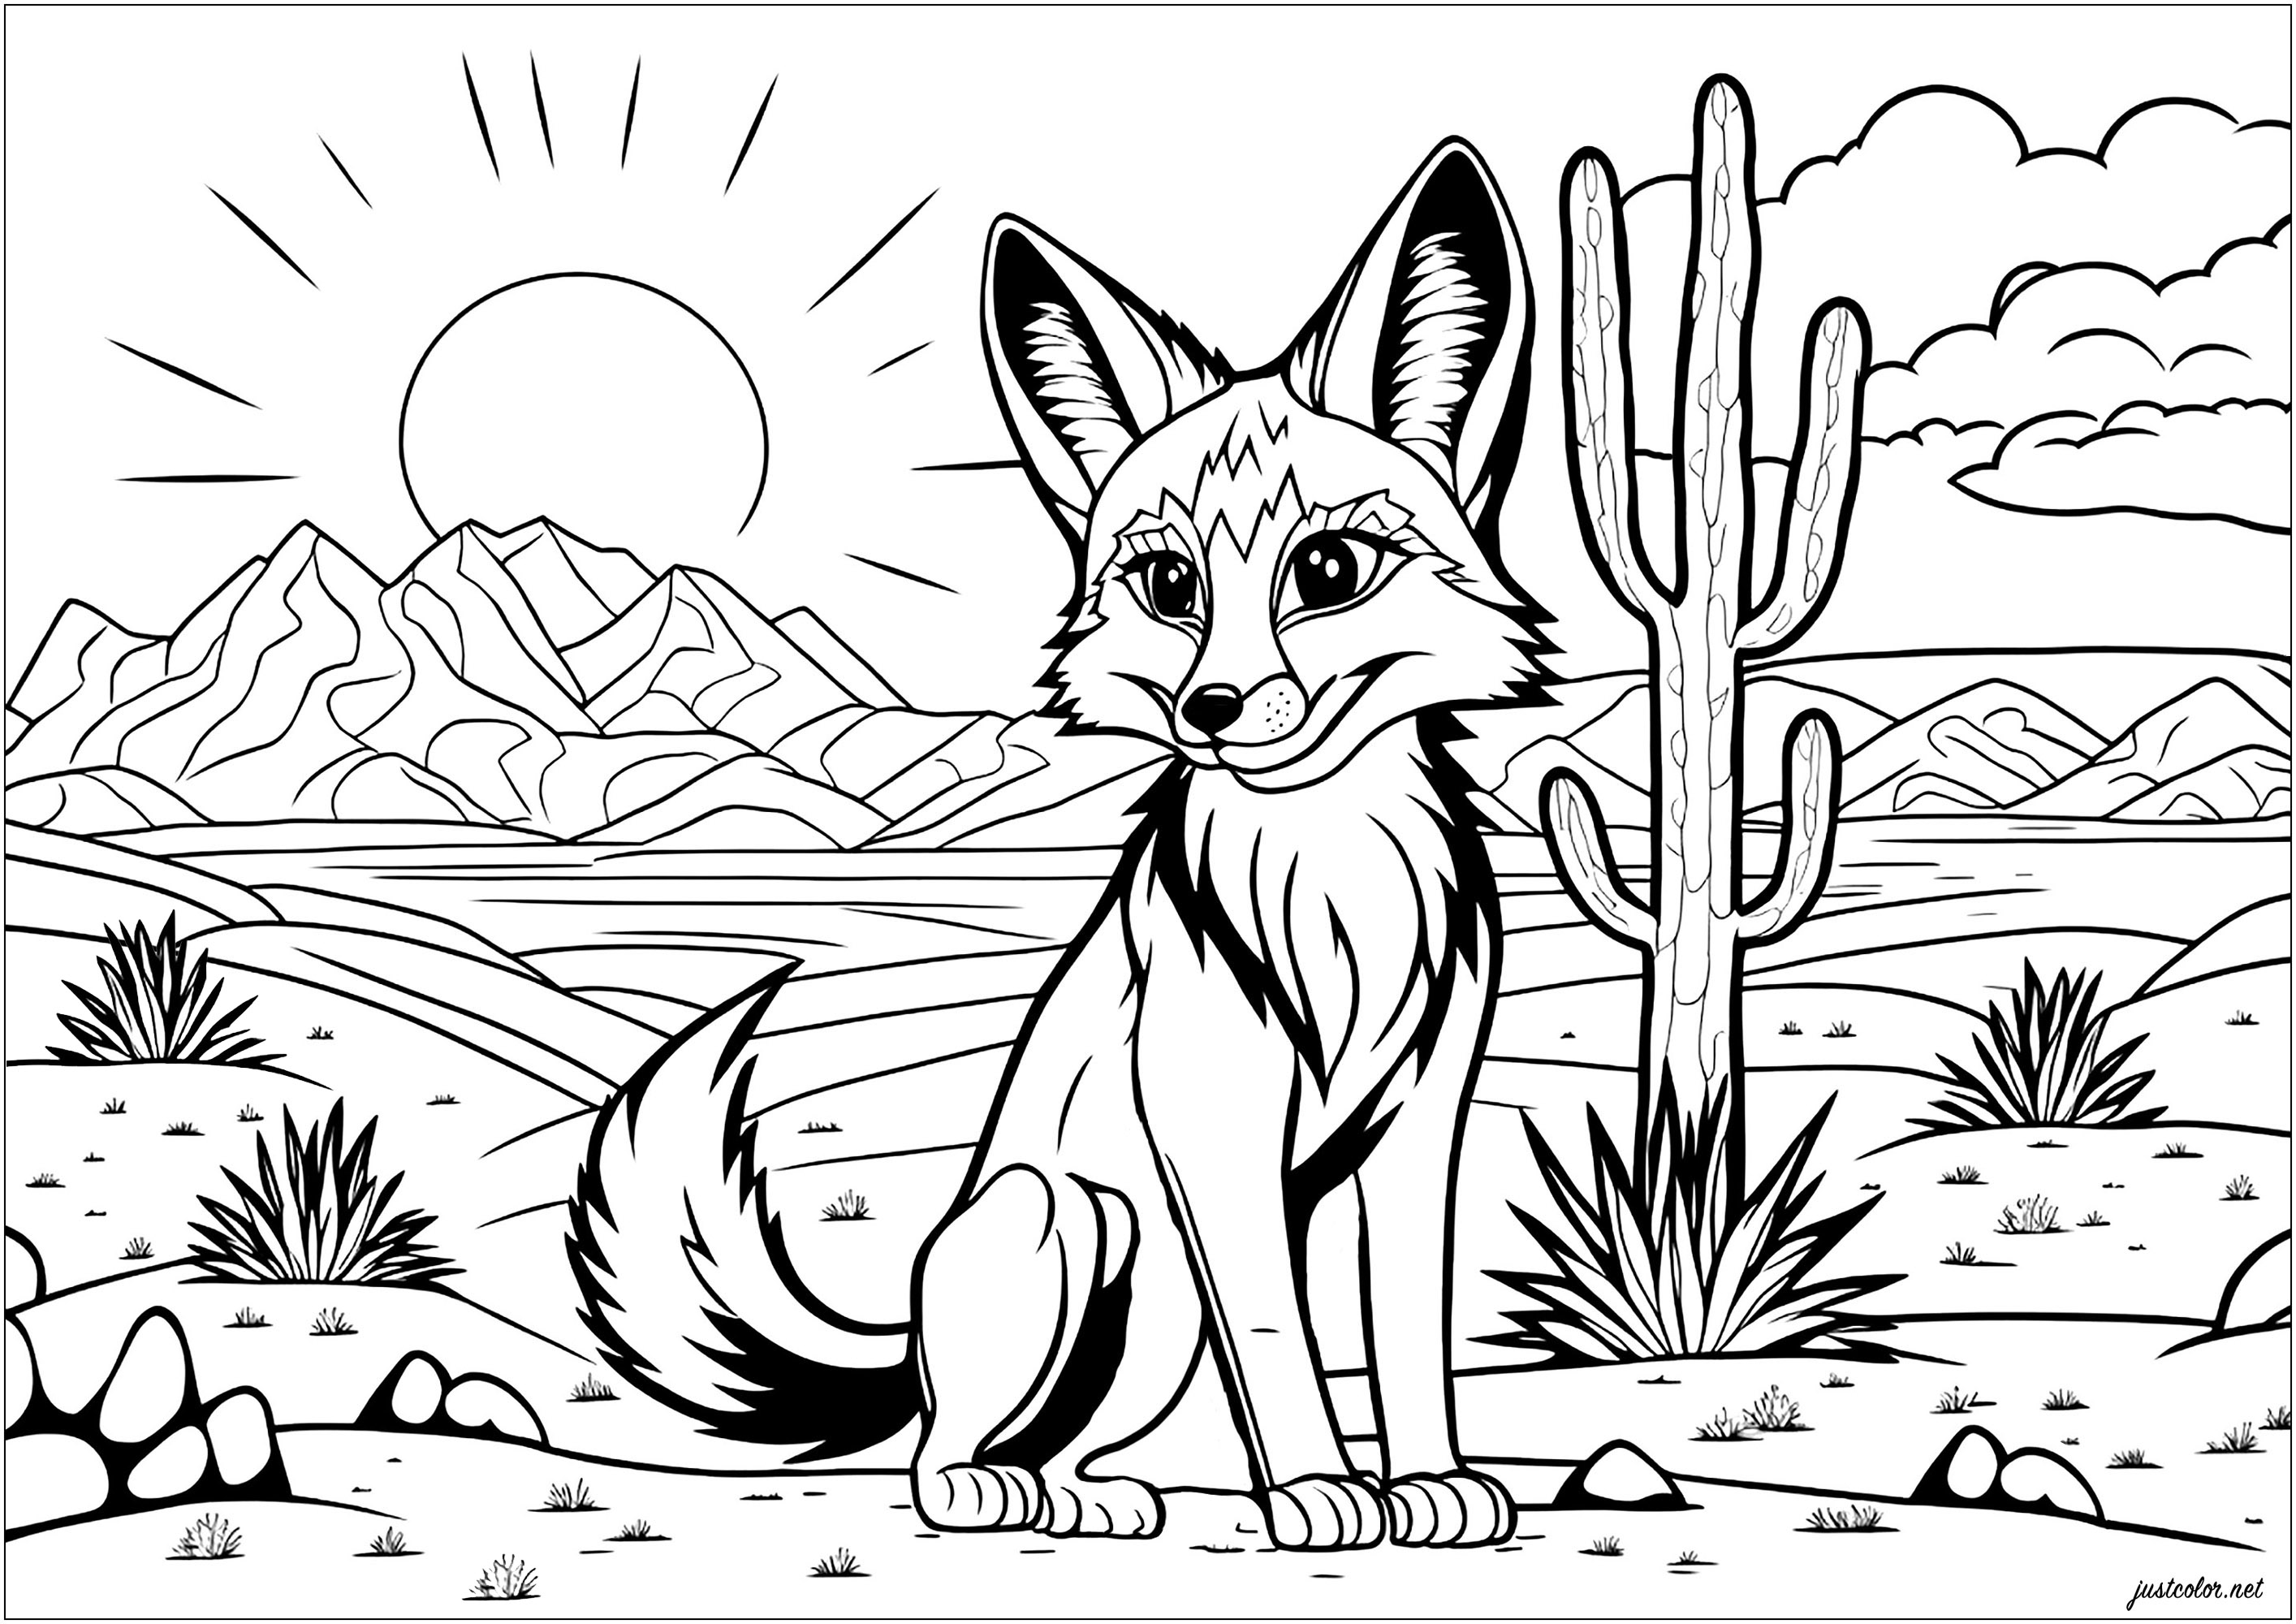 A majestic fox in the arid desert. Coloring this fox in the desert will bring this unique creature to life with vibrant hues, letting you imagine what it might be like to be part of its wild world.